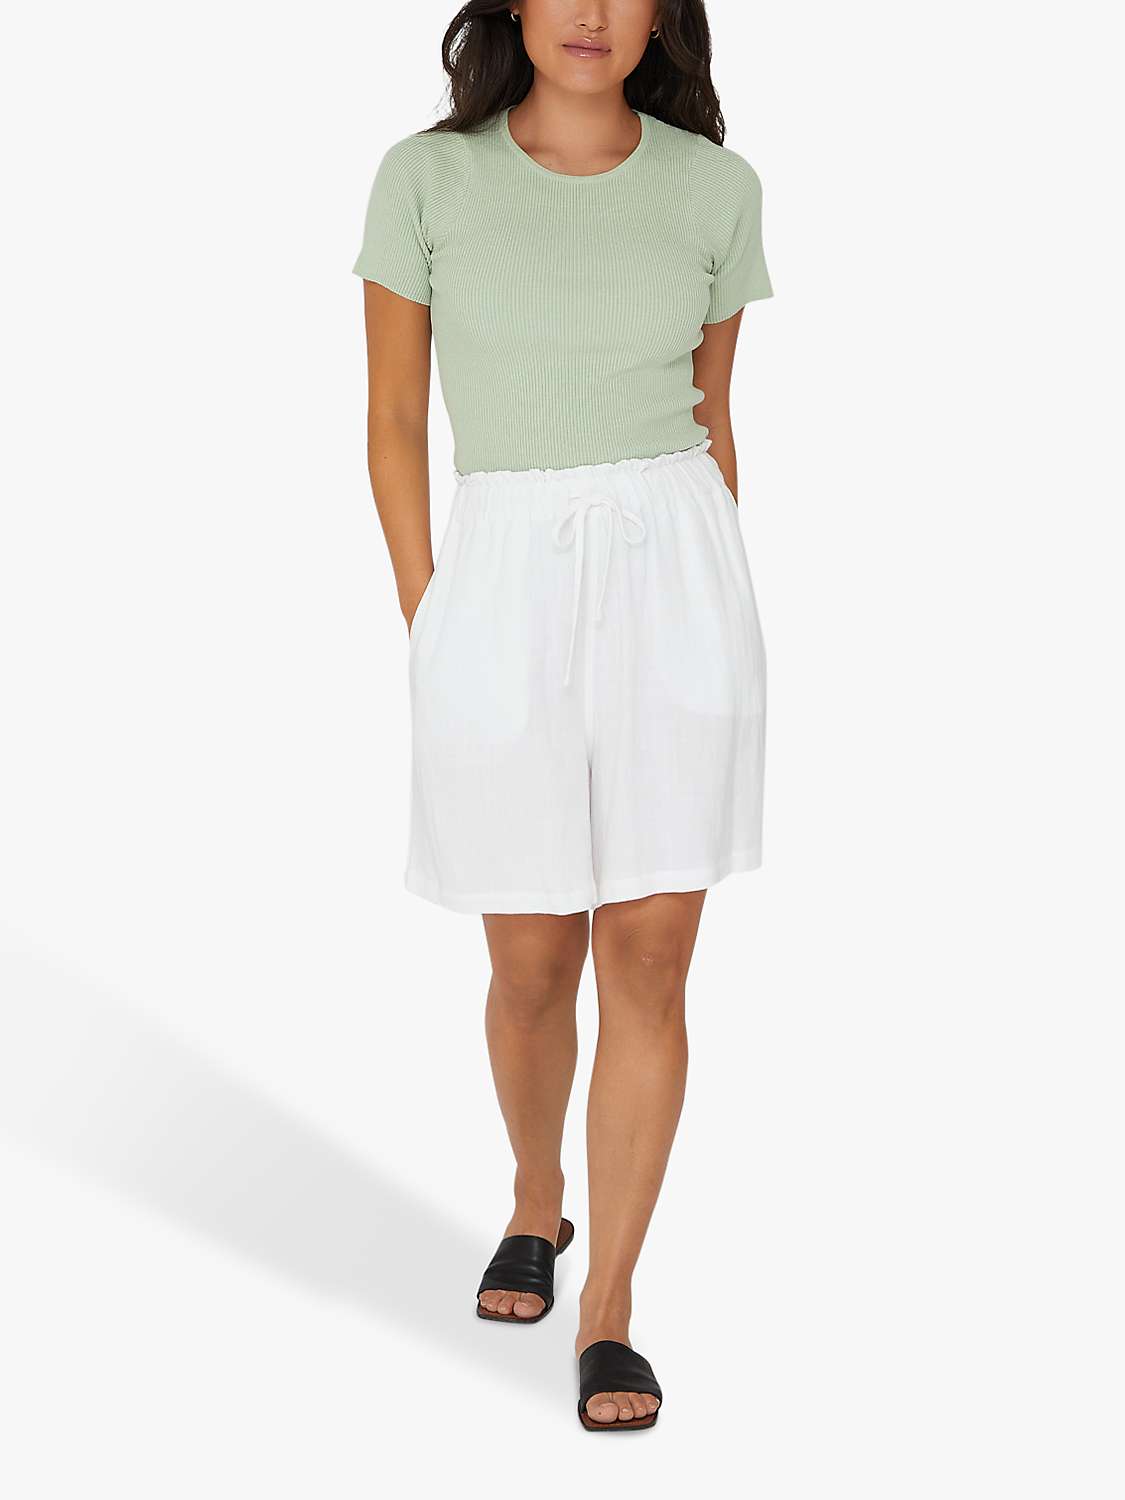 Buy A-VIEW Rib Knit Short Sleeve Top Online at johnlewis.com